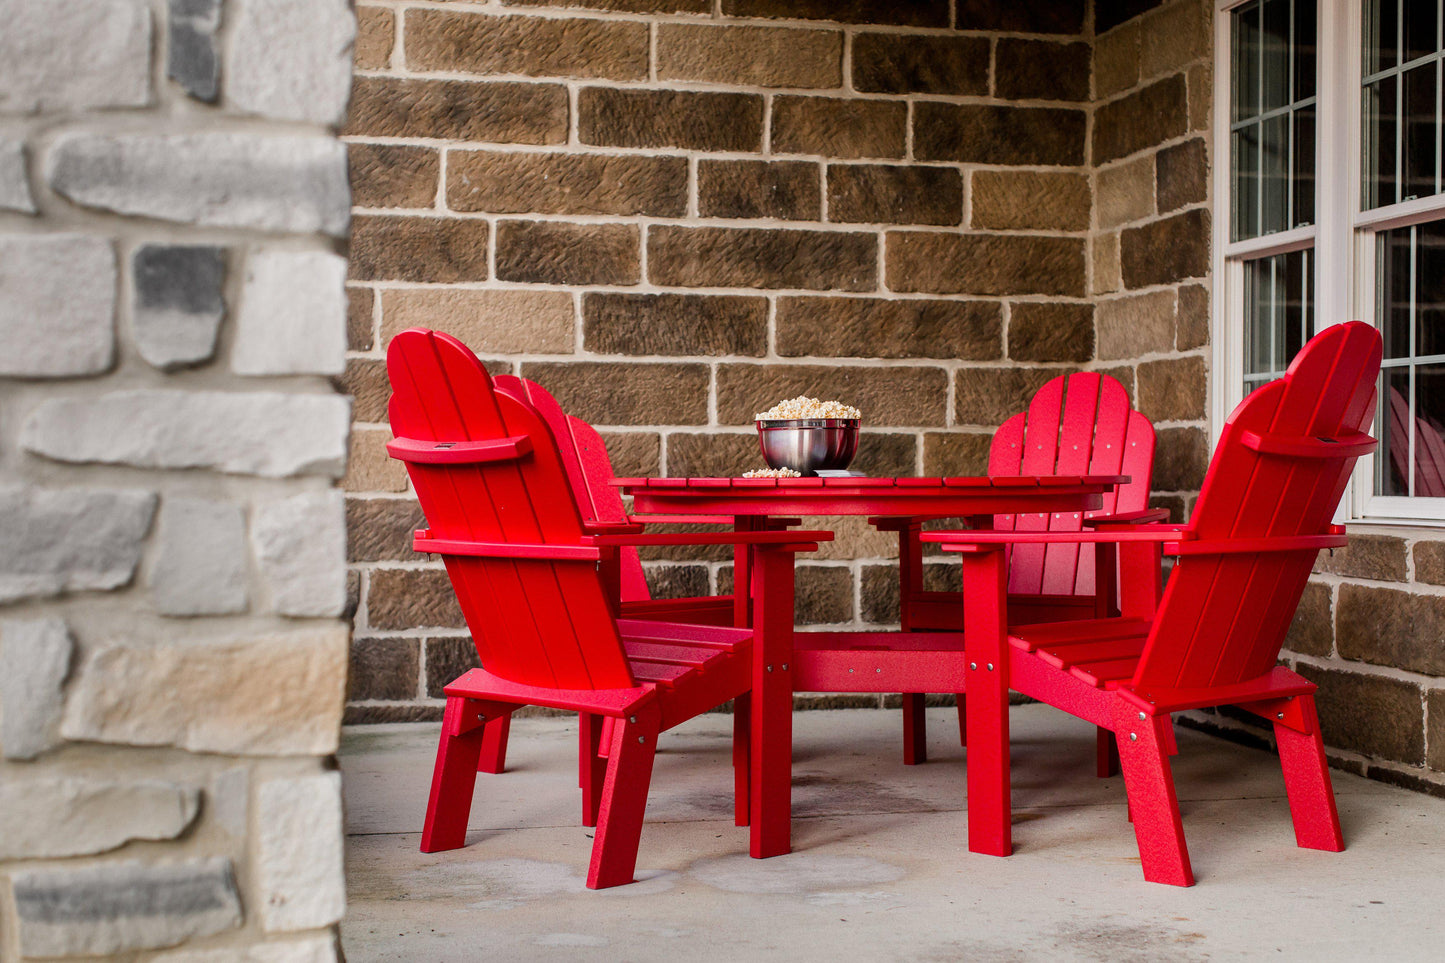 Wildridge Recycled Plastic Classic 46" Round Table Set with 4 Dining/Deck Chairs - LEAD TIME TO SHIP 6 WEEKS OR LESS